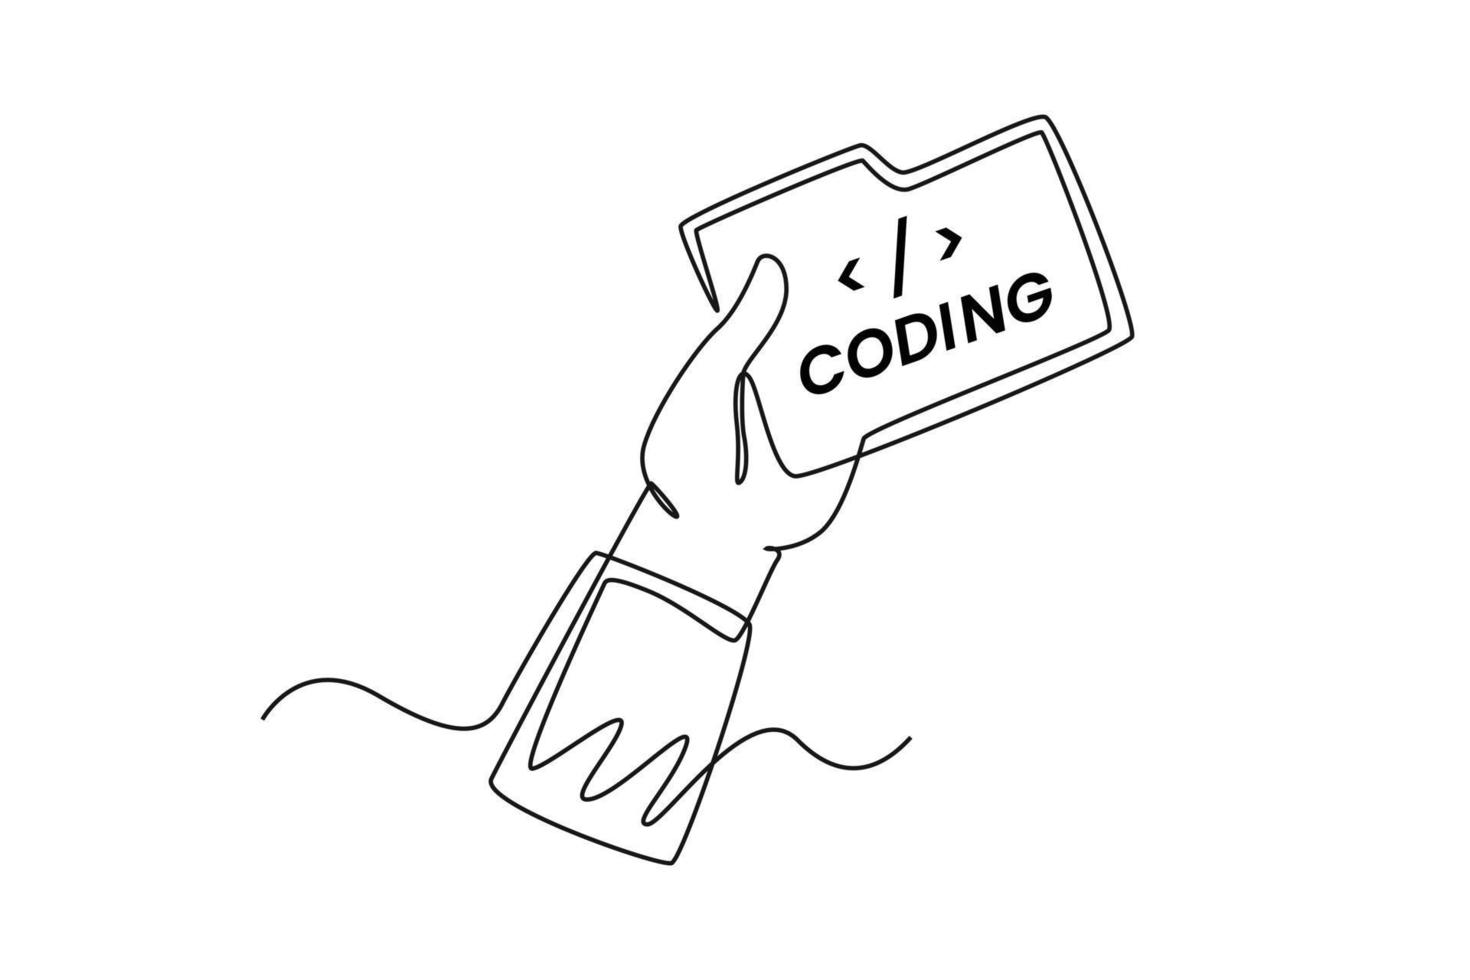 Single one line drawing hand holding coding file. Programming code concept. Continuous line draw design graphic vector illustration.